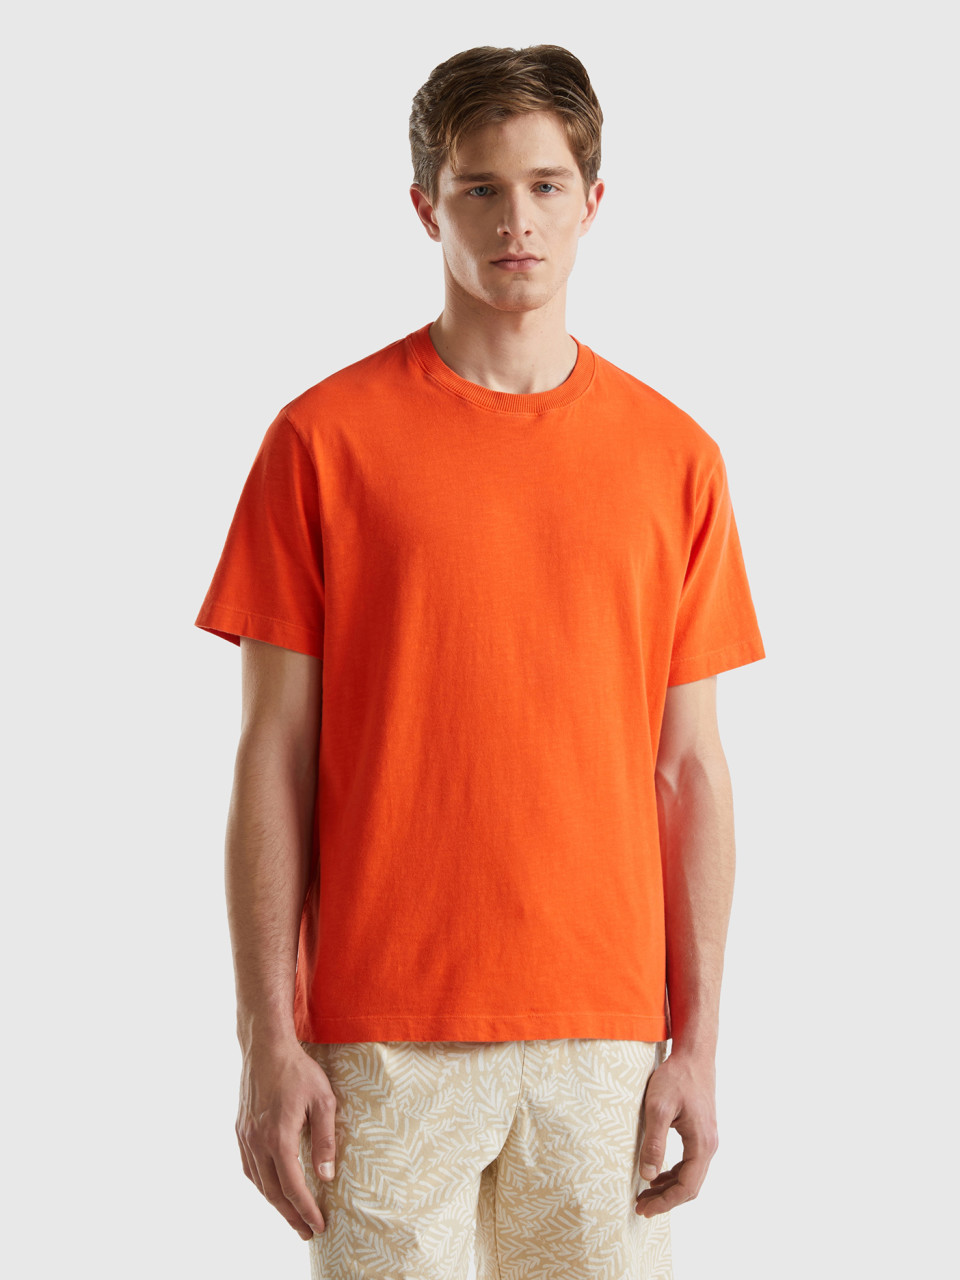 Benetton, Leichtes T-shirt Relaxed Fit, Orange, male